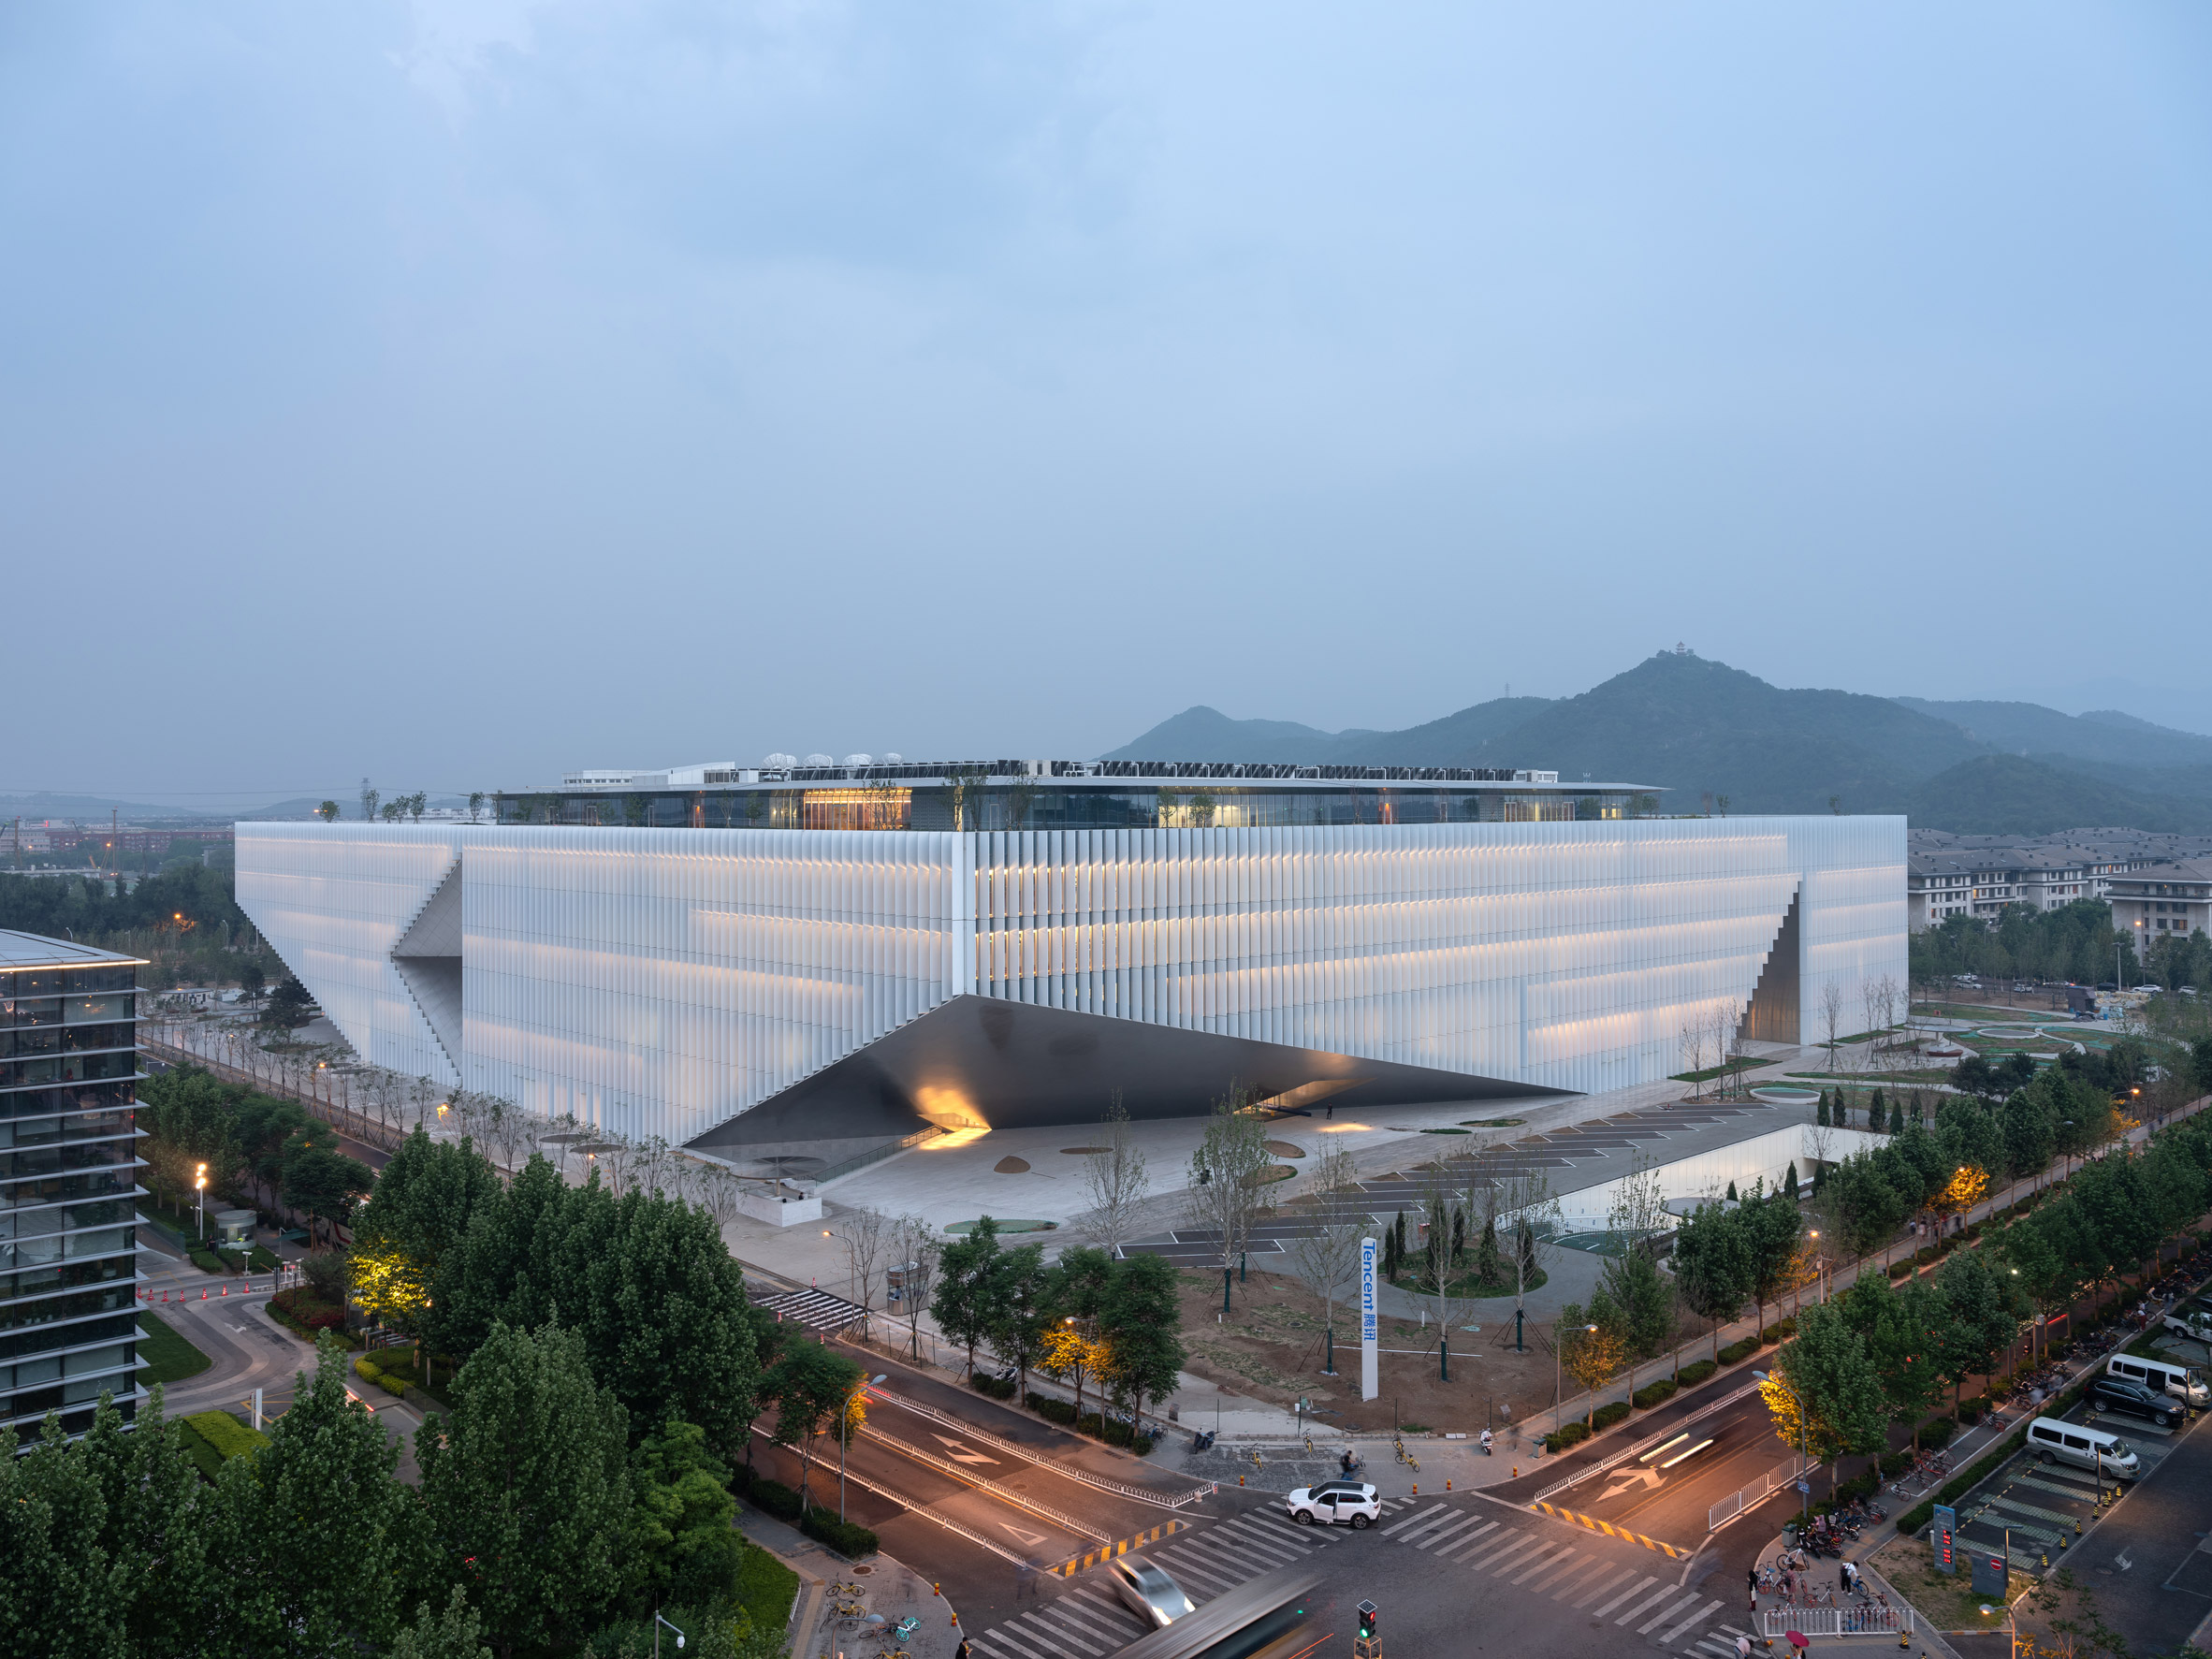 Tencent Beijing Headquarters in China by OMA